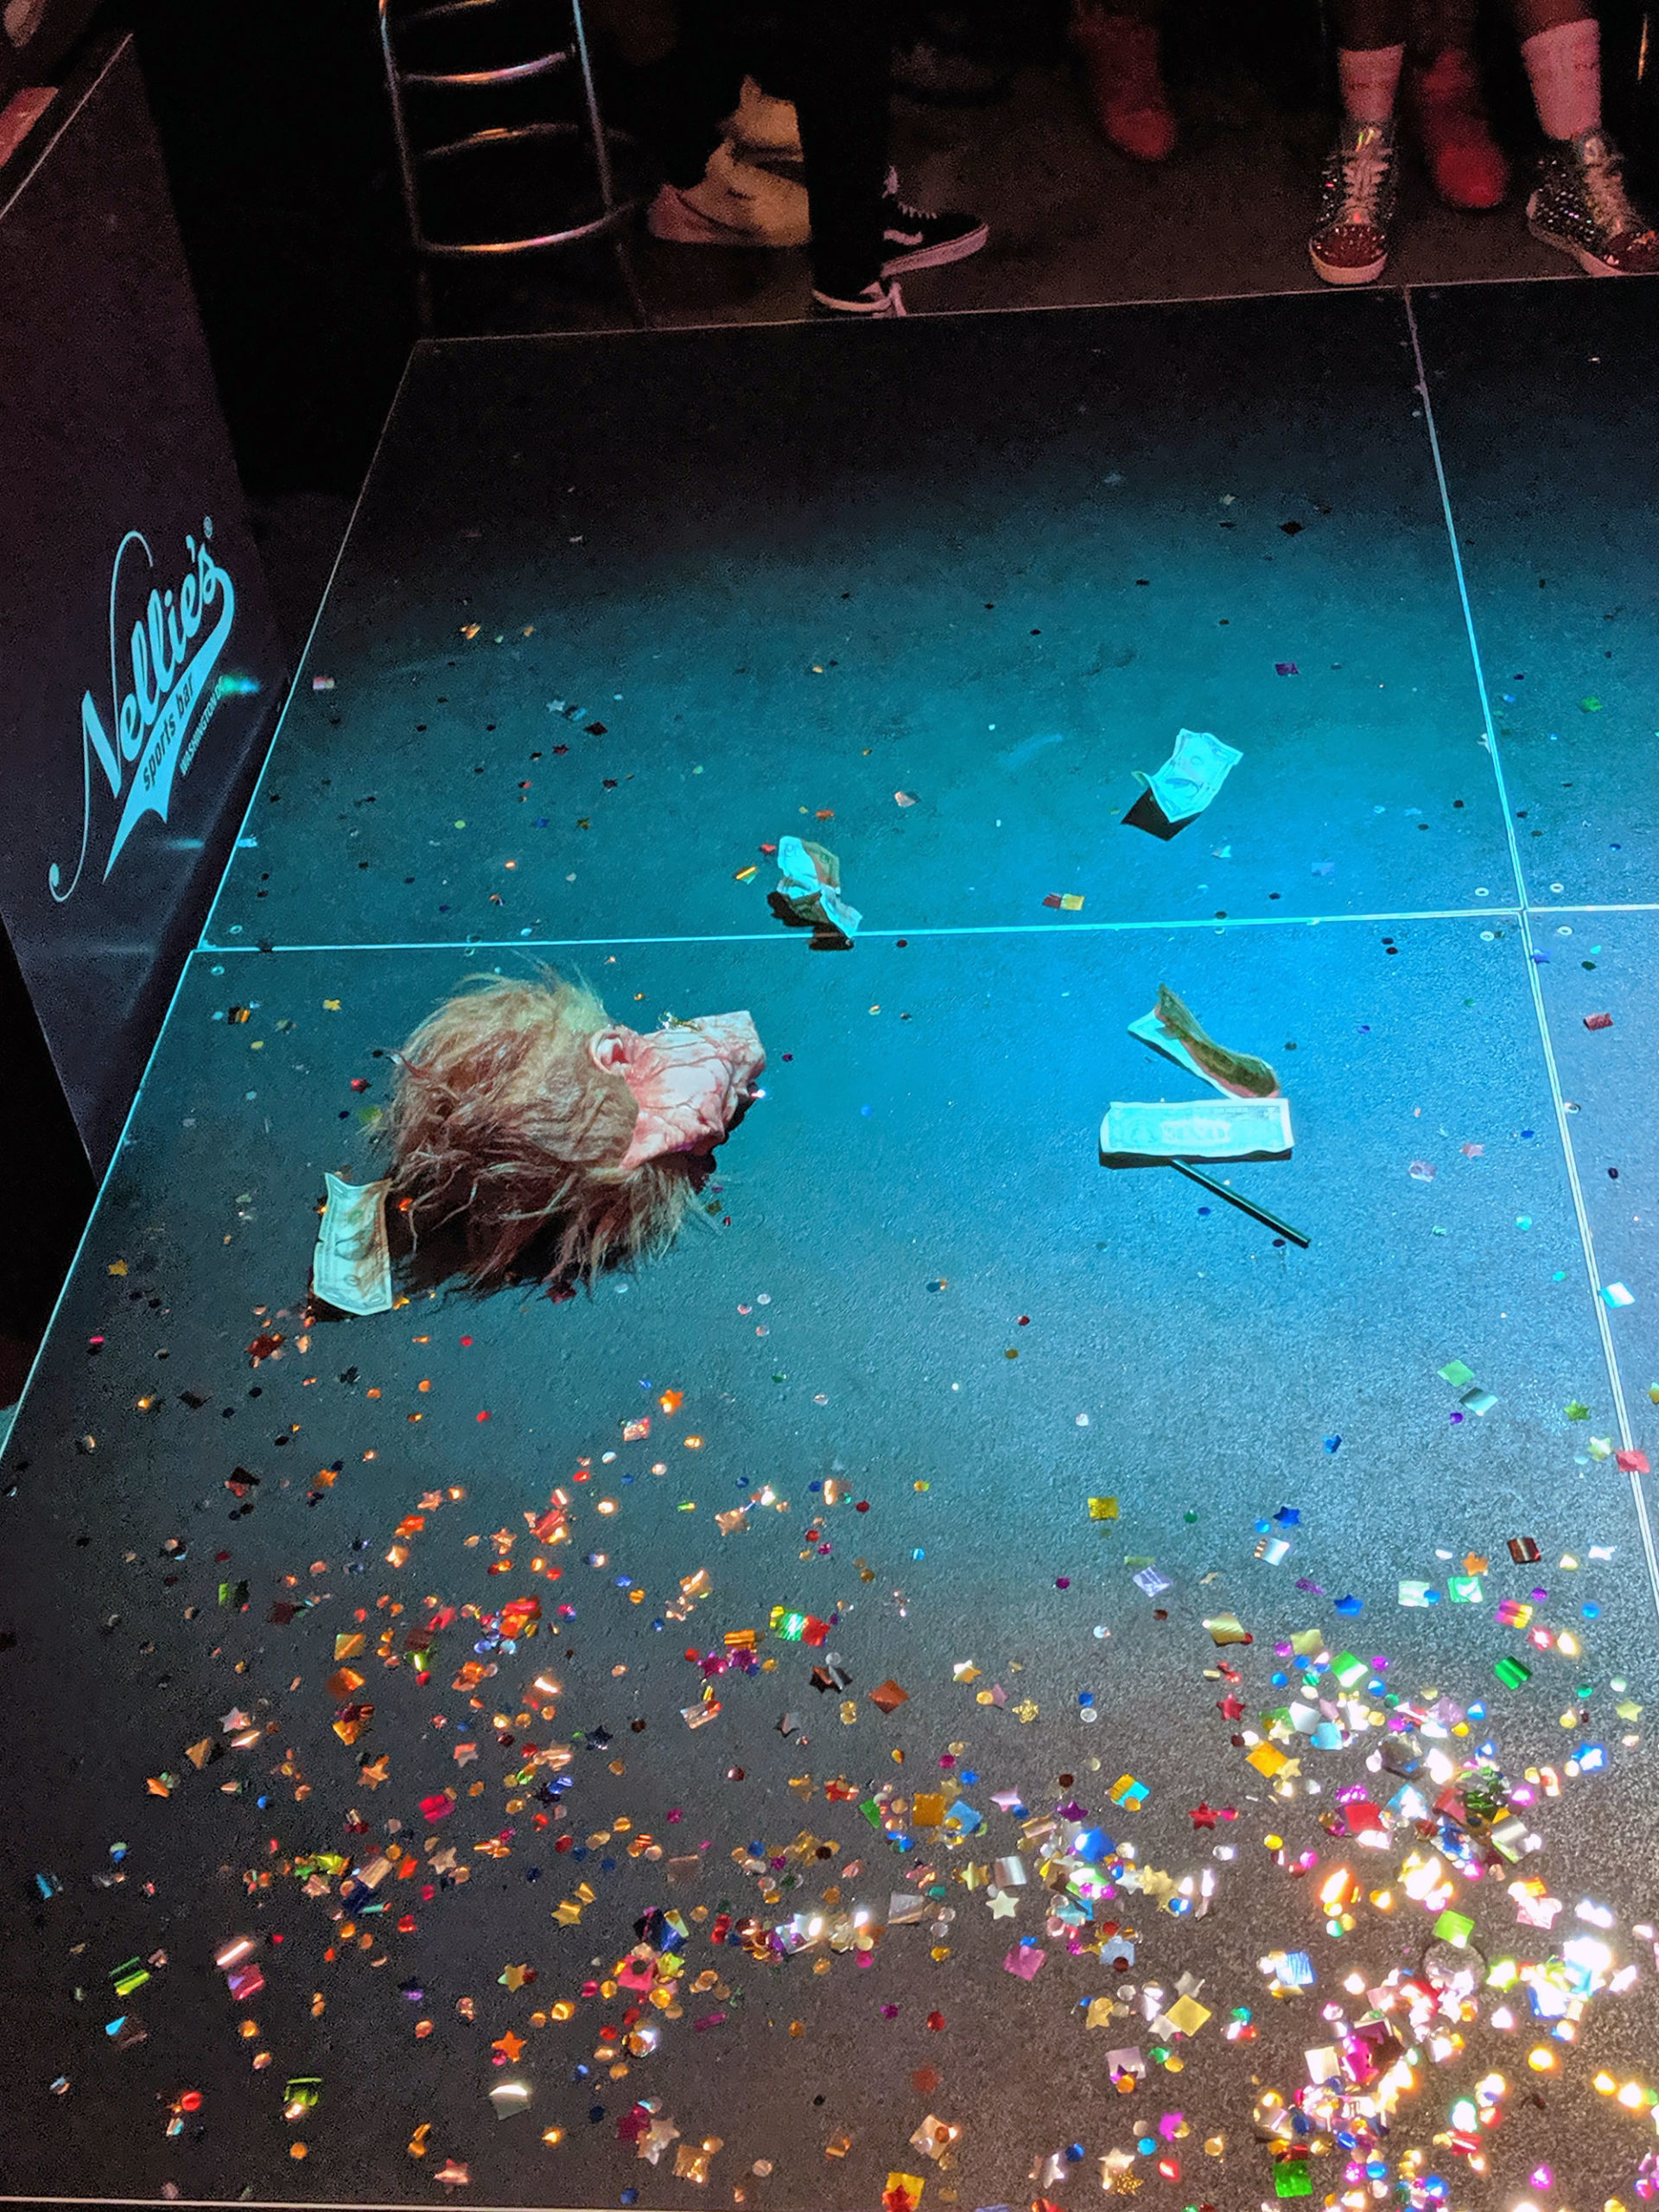 The floor destroyed at Nellies Sports Bar.